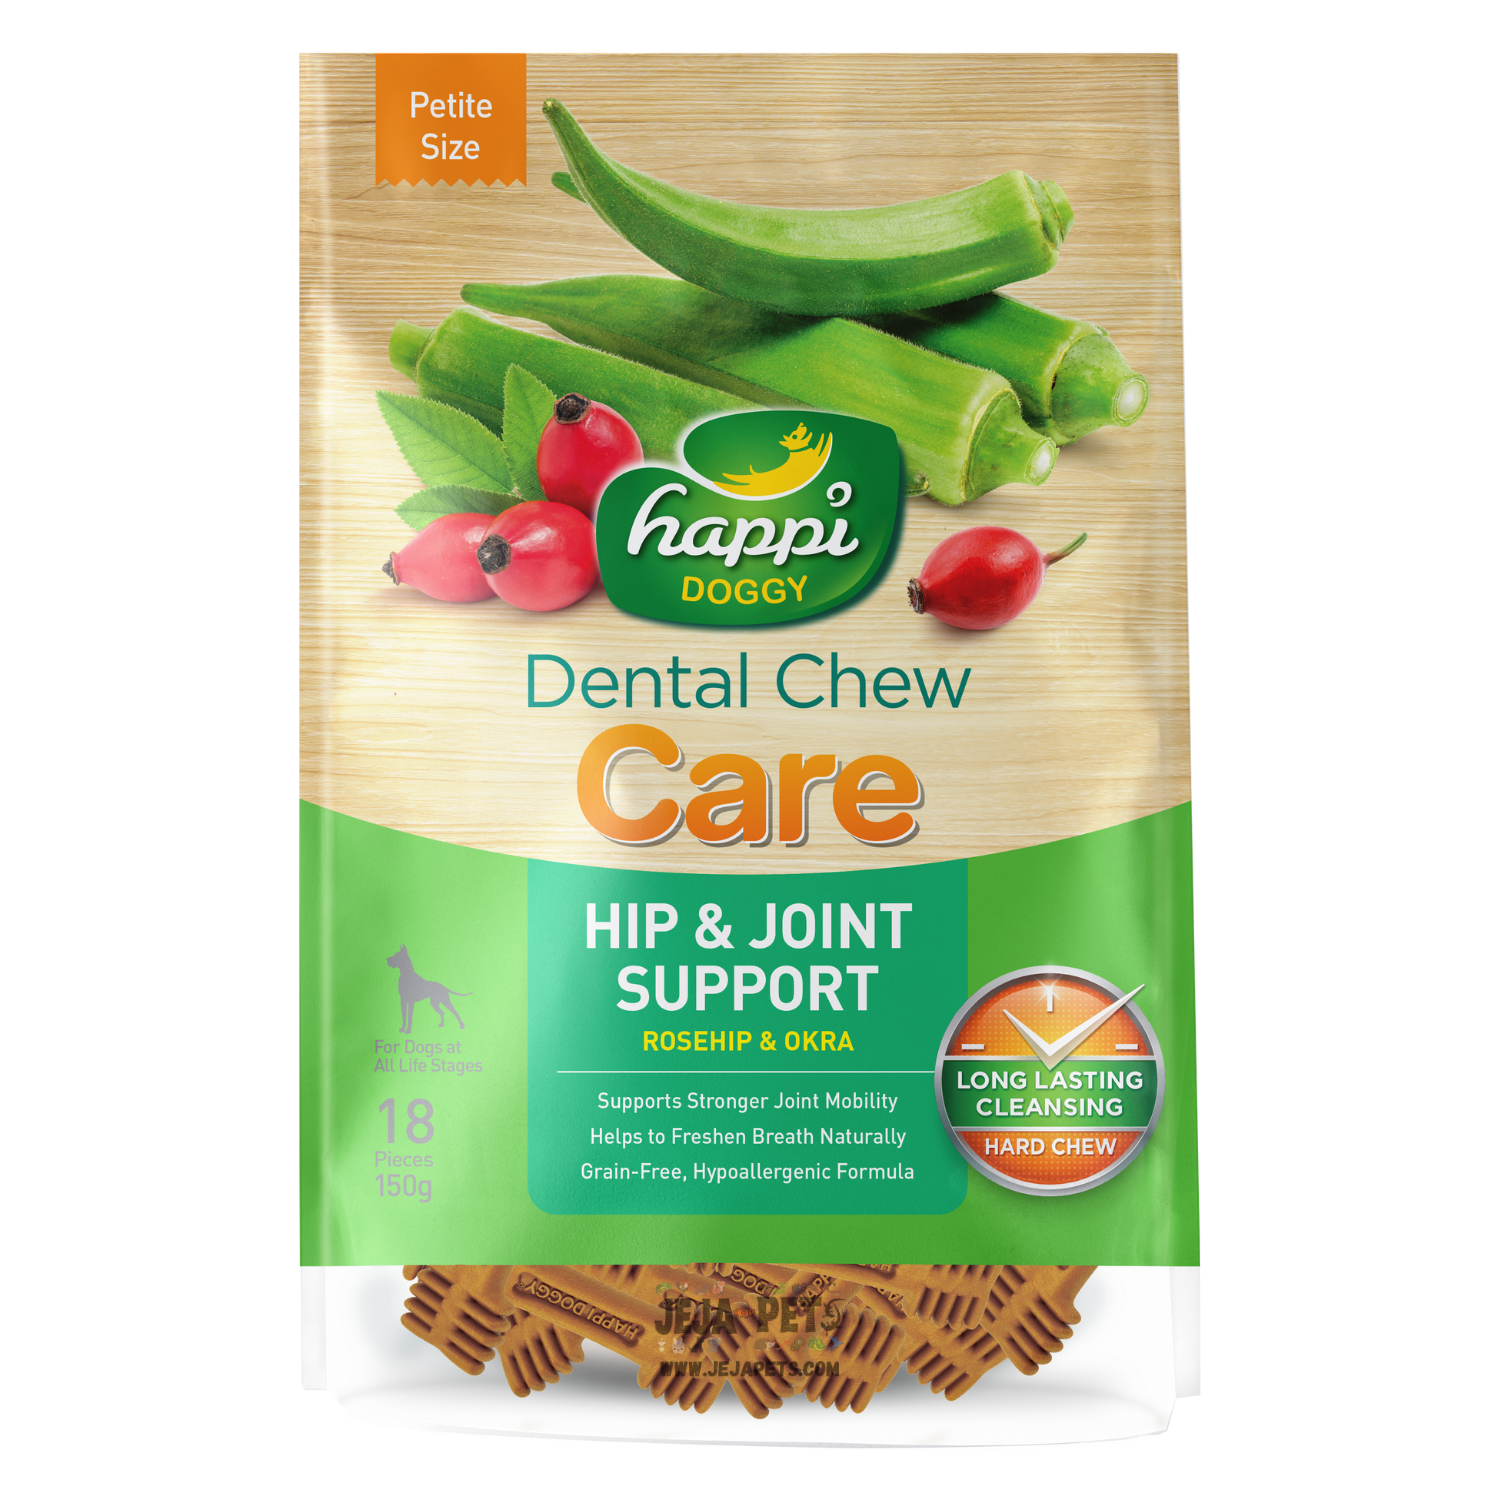 Happi Doggy Dental Chew Hip & Joint Support (Rosehip & Okra) Hard Chew for Dogs - Petite / Regular